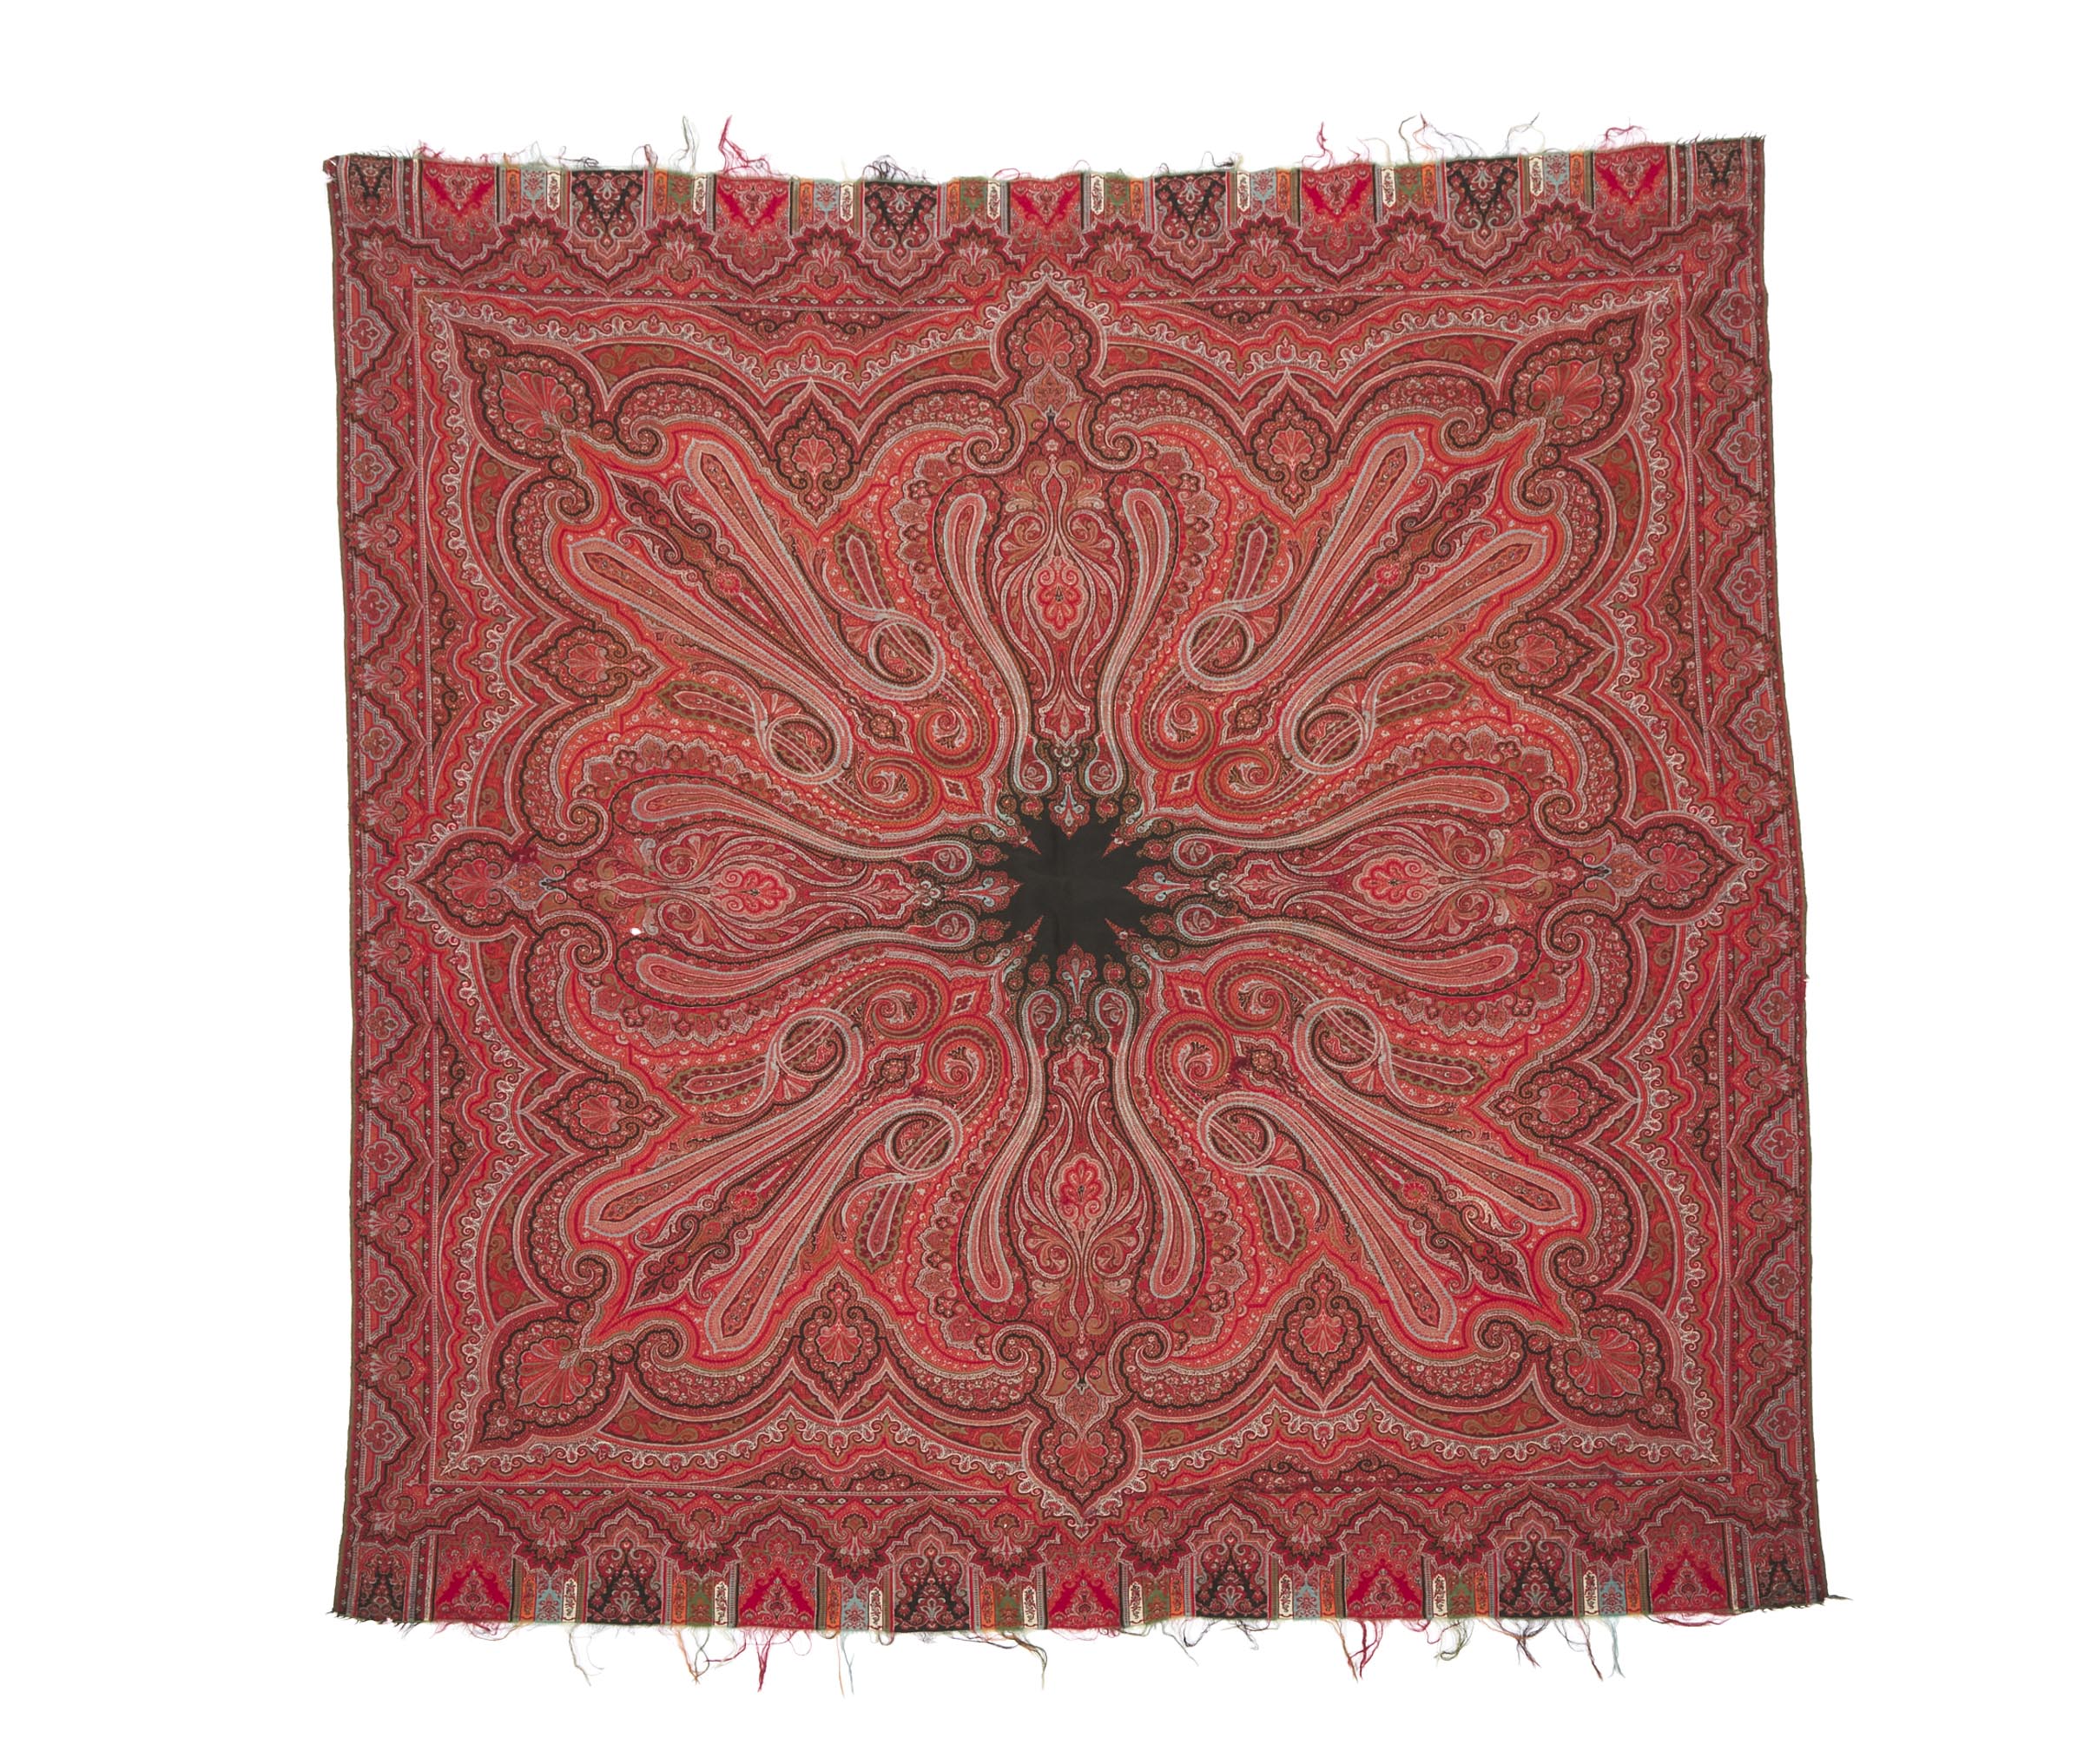 Two Indian Kashmir Shawls, early 20th century